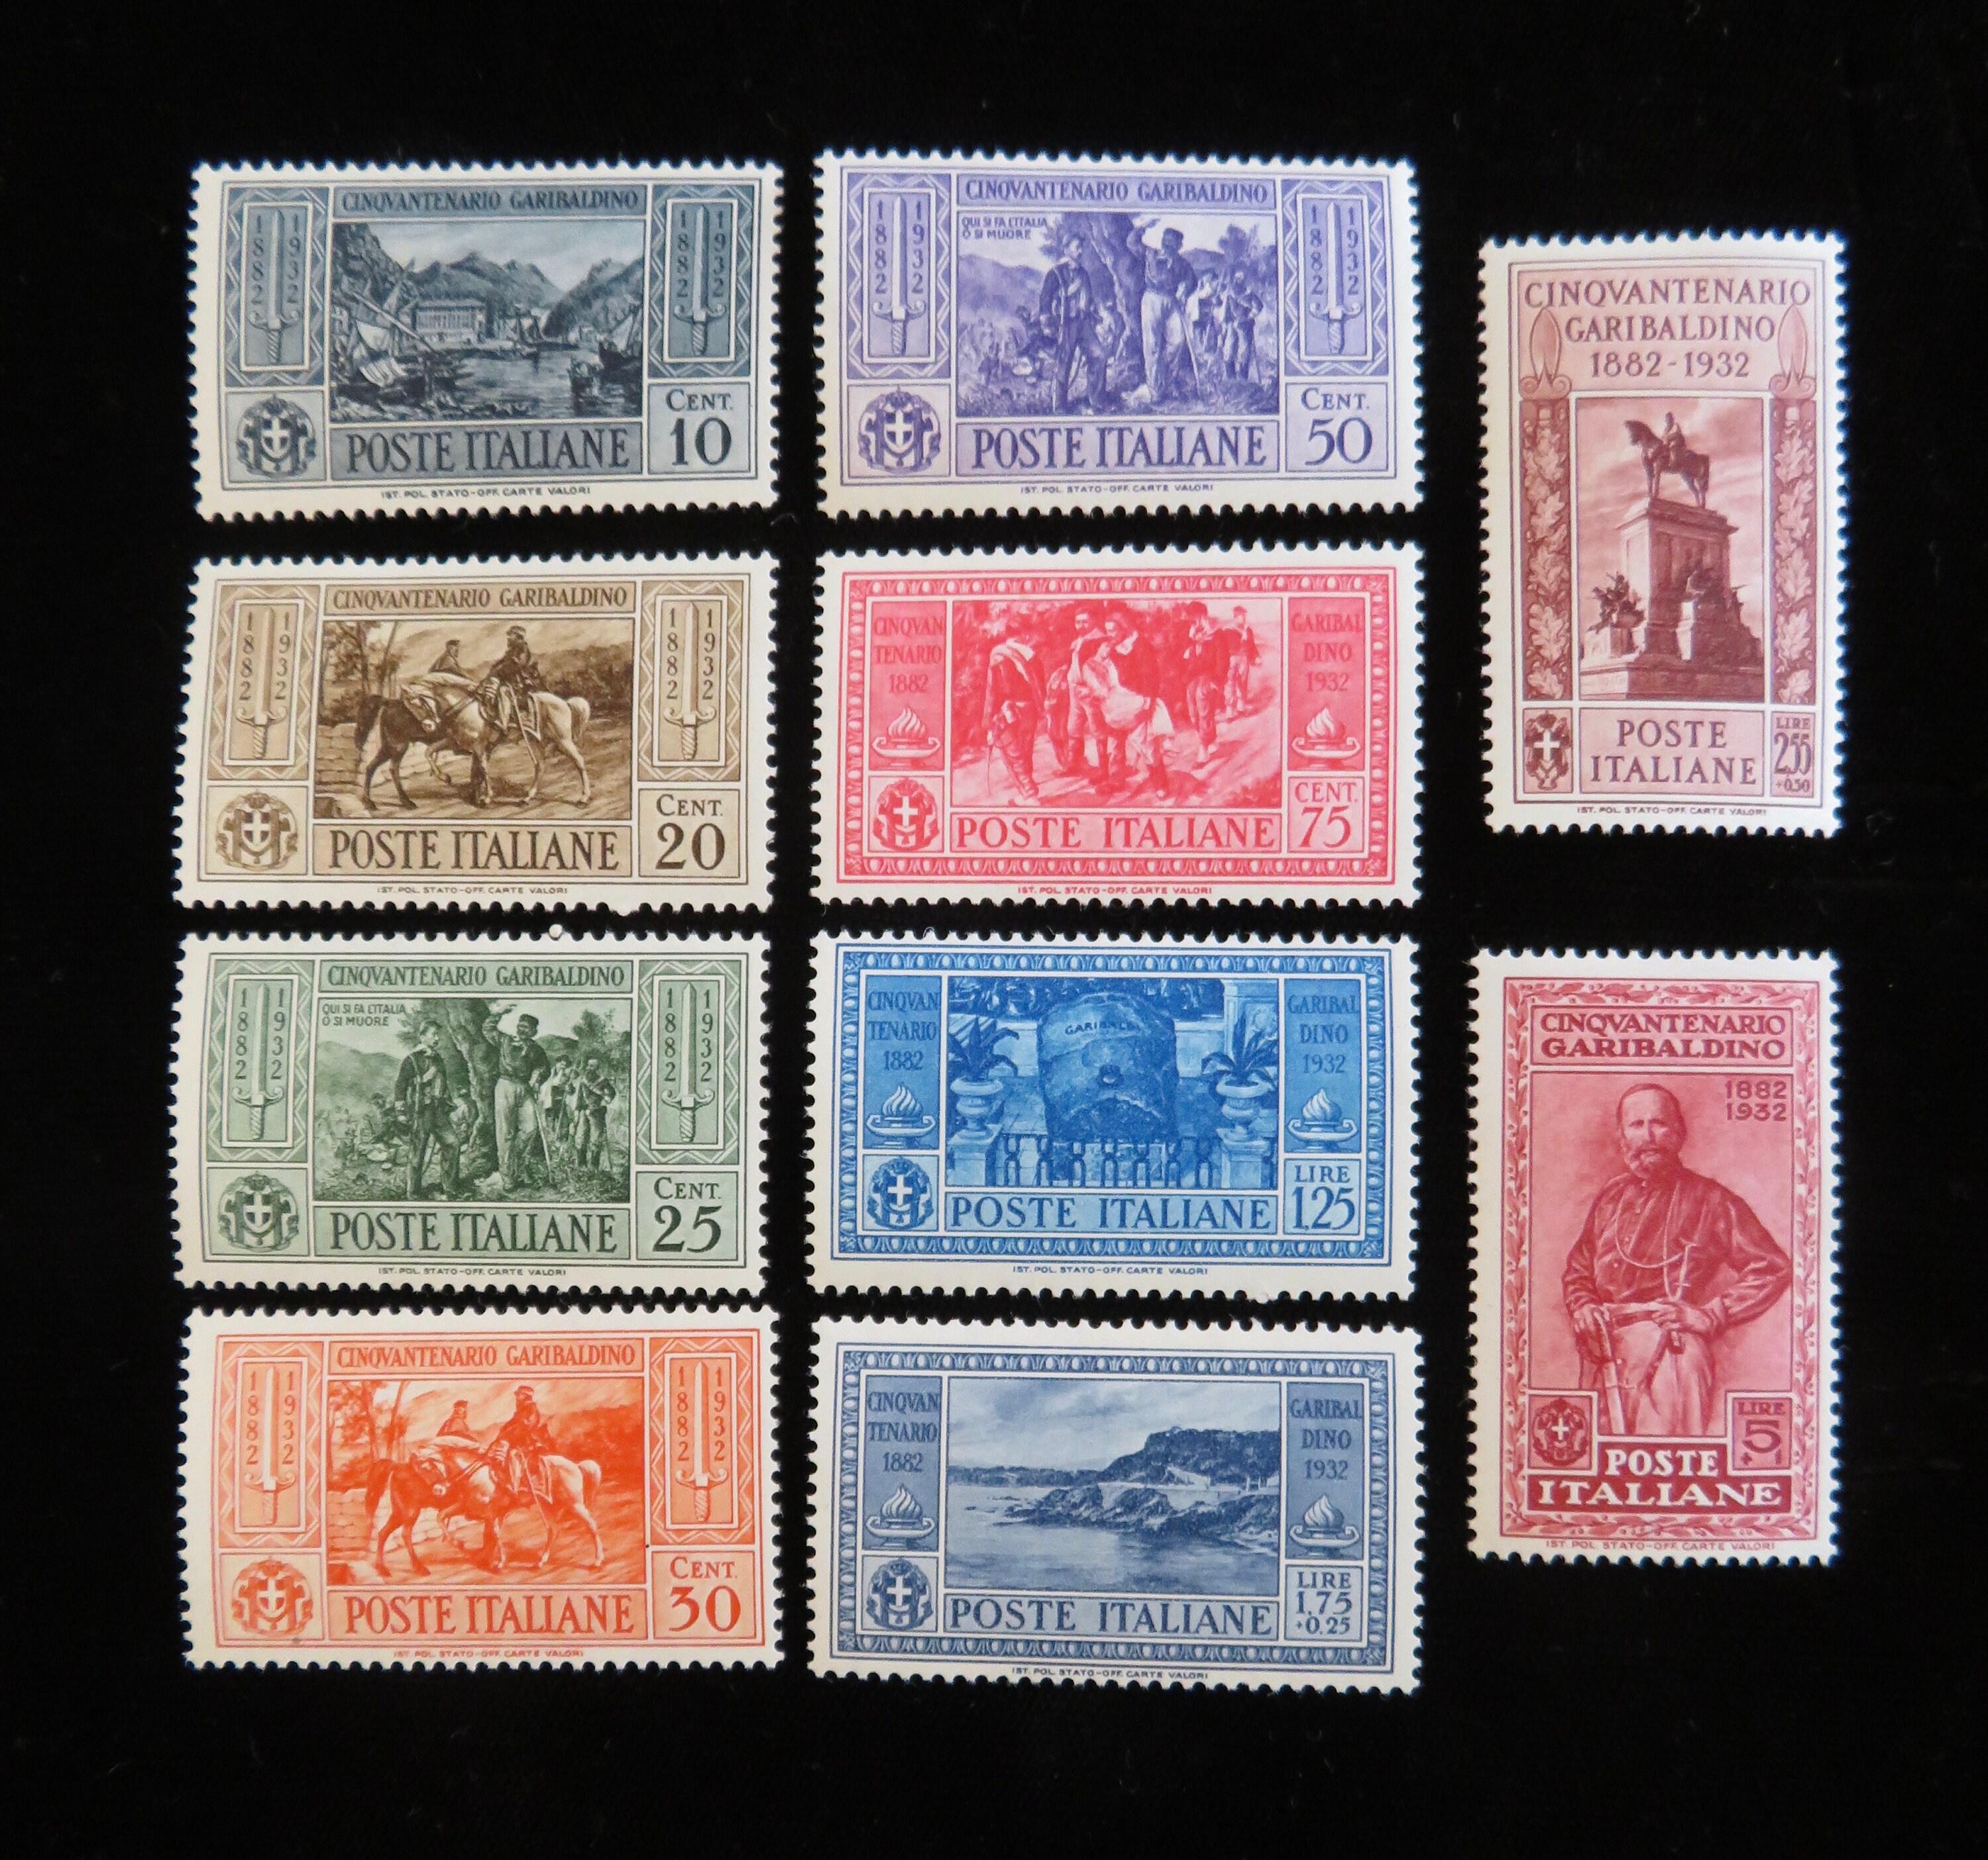  1.75 Lire Italy Postal Stamp : Toys & Games